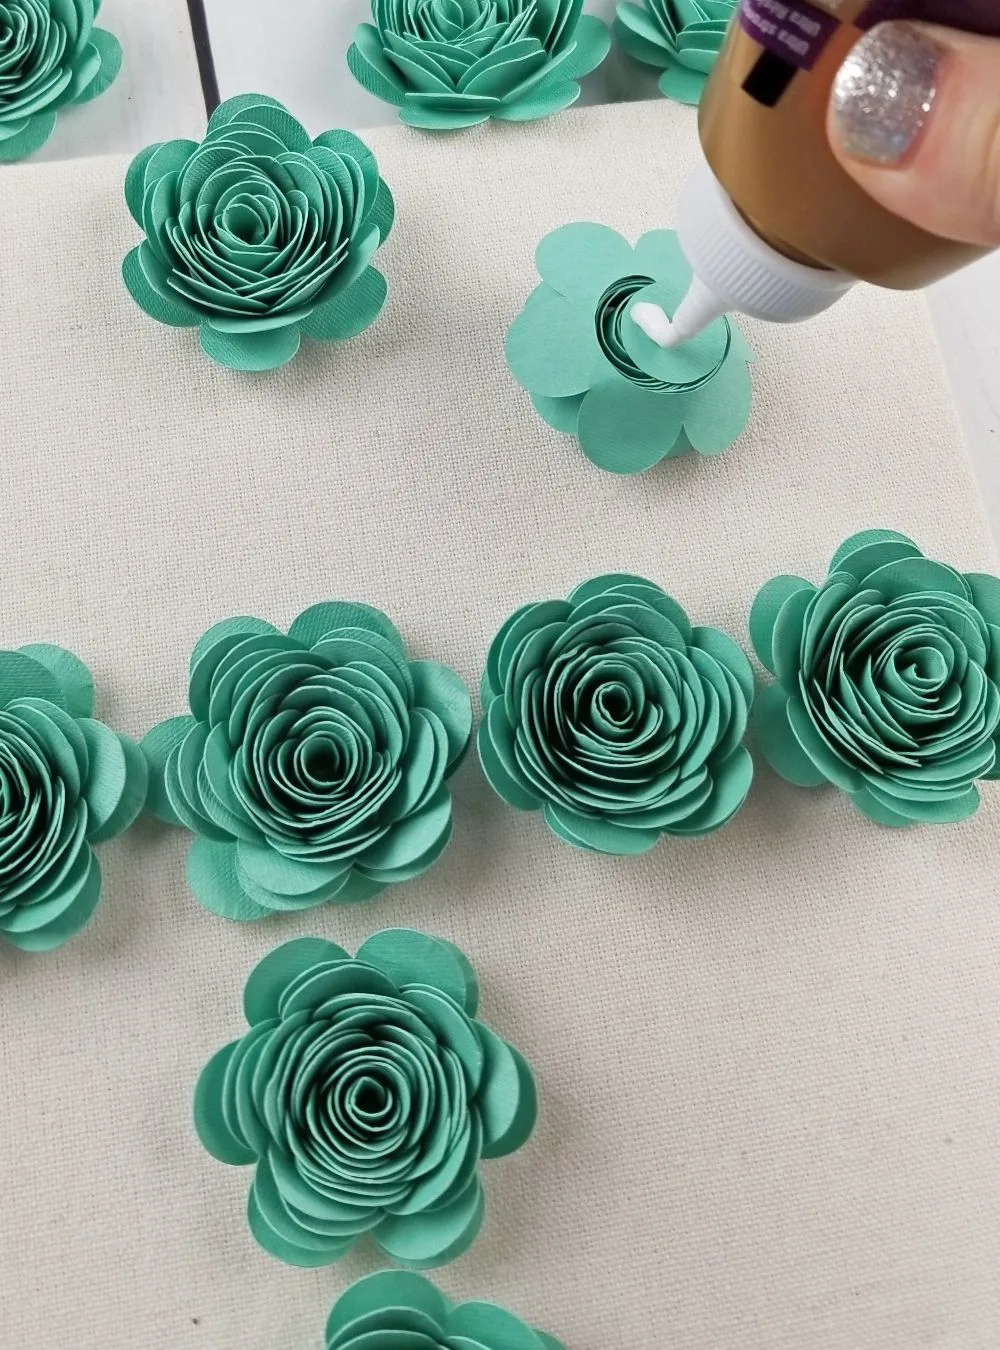 gluing paper flowers in shadow box